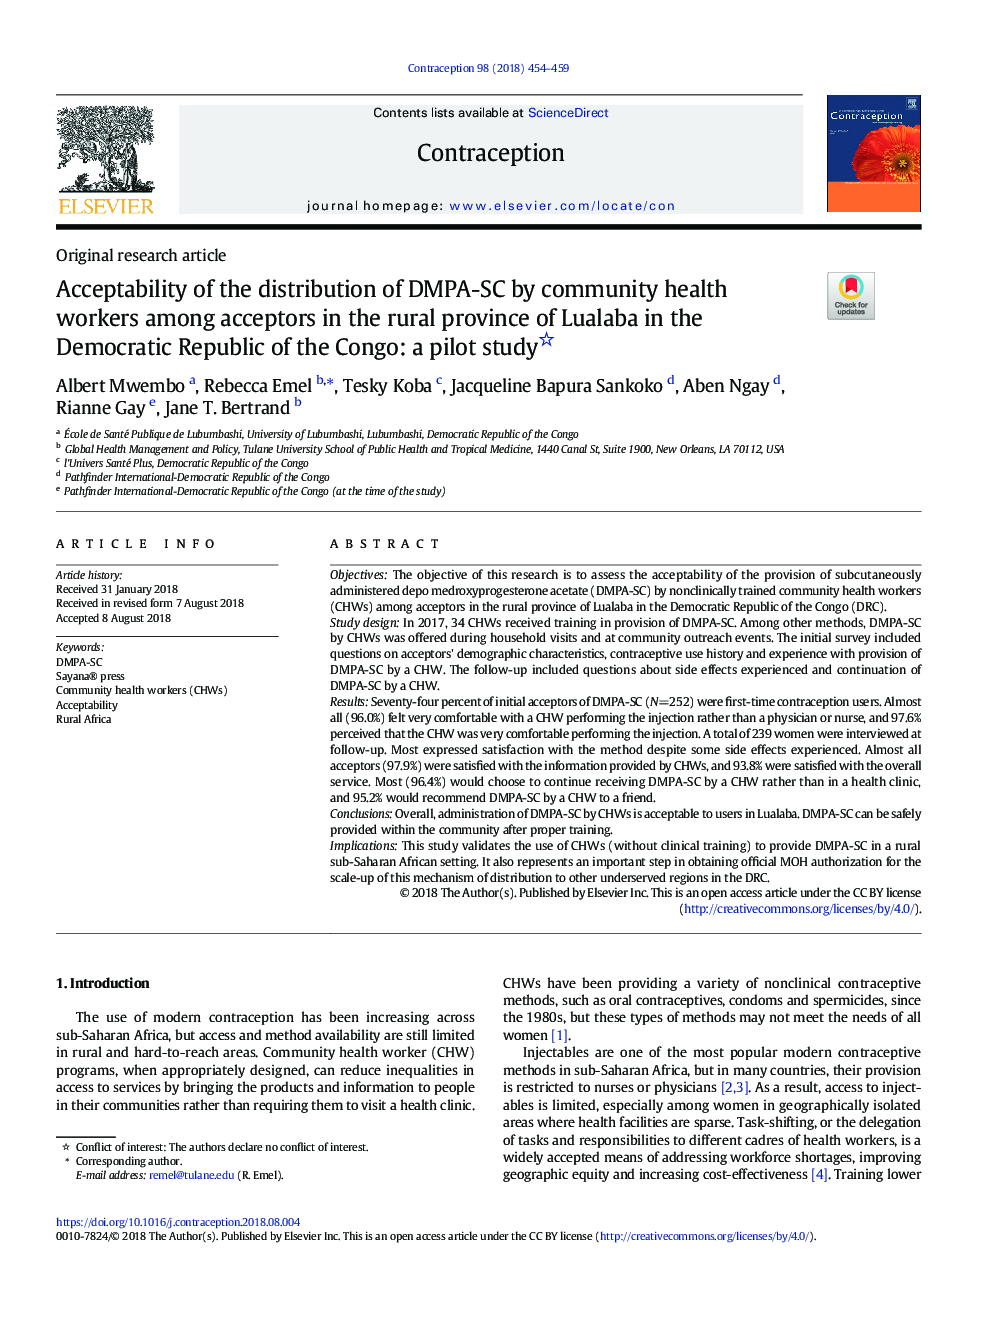 Acceptability of the distribution of DMPA-SC by community health workers among acceptors in the rural province of Lualaba in the Democratic Republic of the Congo: a pilot study